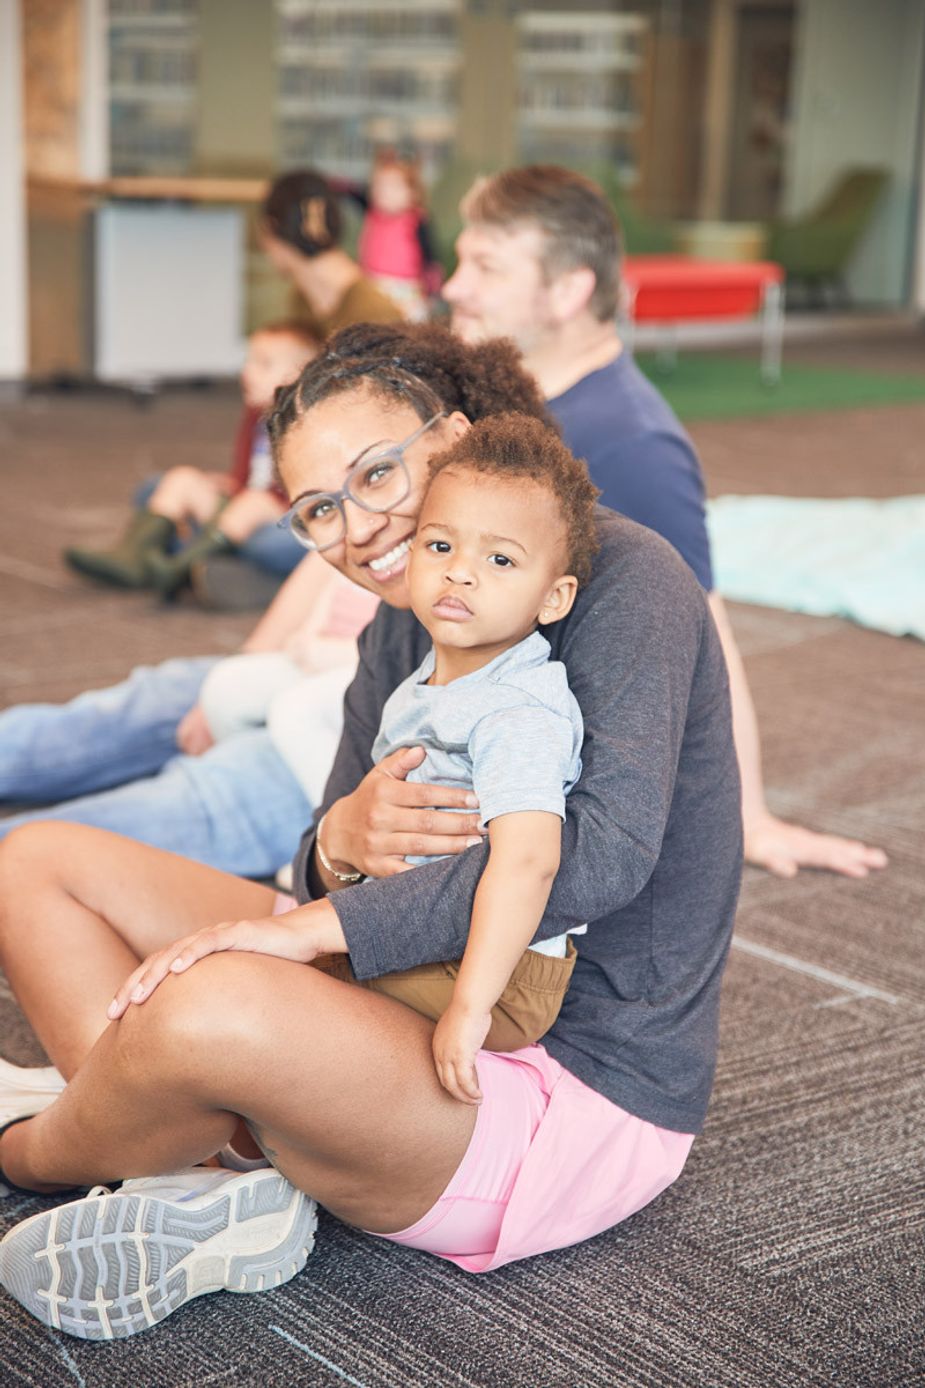 Families enjoy Wiggly Wednesdays at the library, where kids listen to stories, dance, sing, and explore the space. Photo courtesy Charlie Neuenschwander